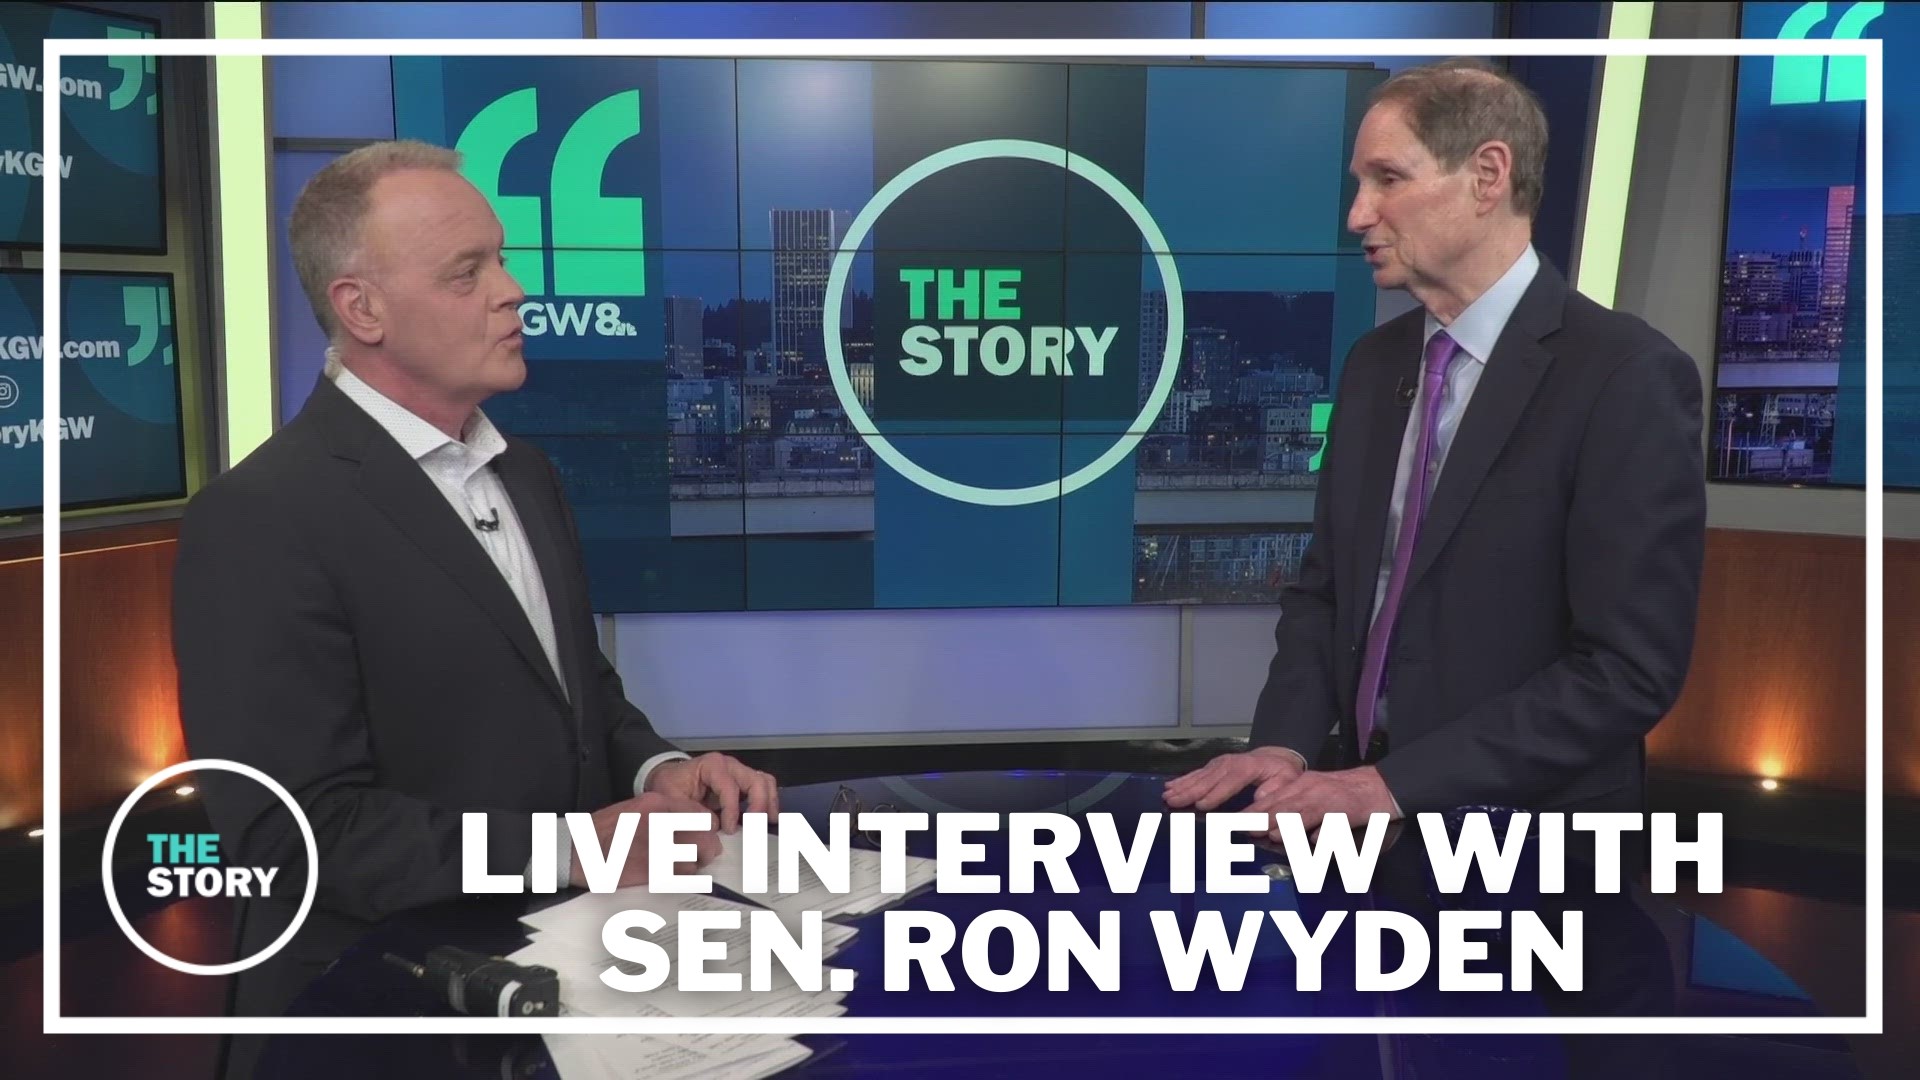 Sen. Ron Wyden stopped by for a pretty wide-ranging and rapid-fire interview about what he's doing to help Oregonians while legislating out in Washington, D.C.